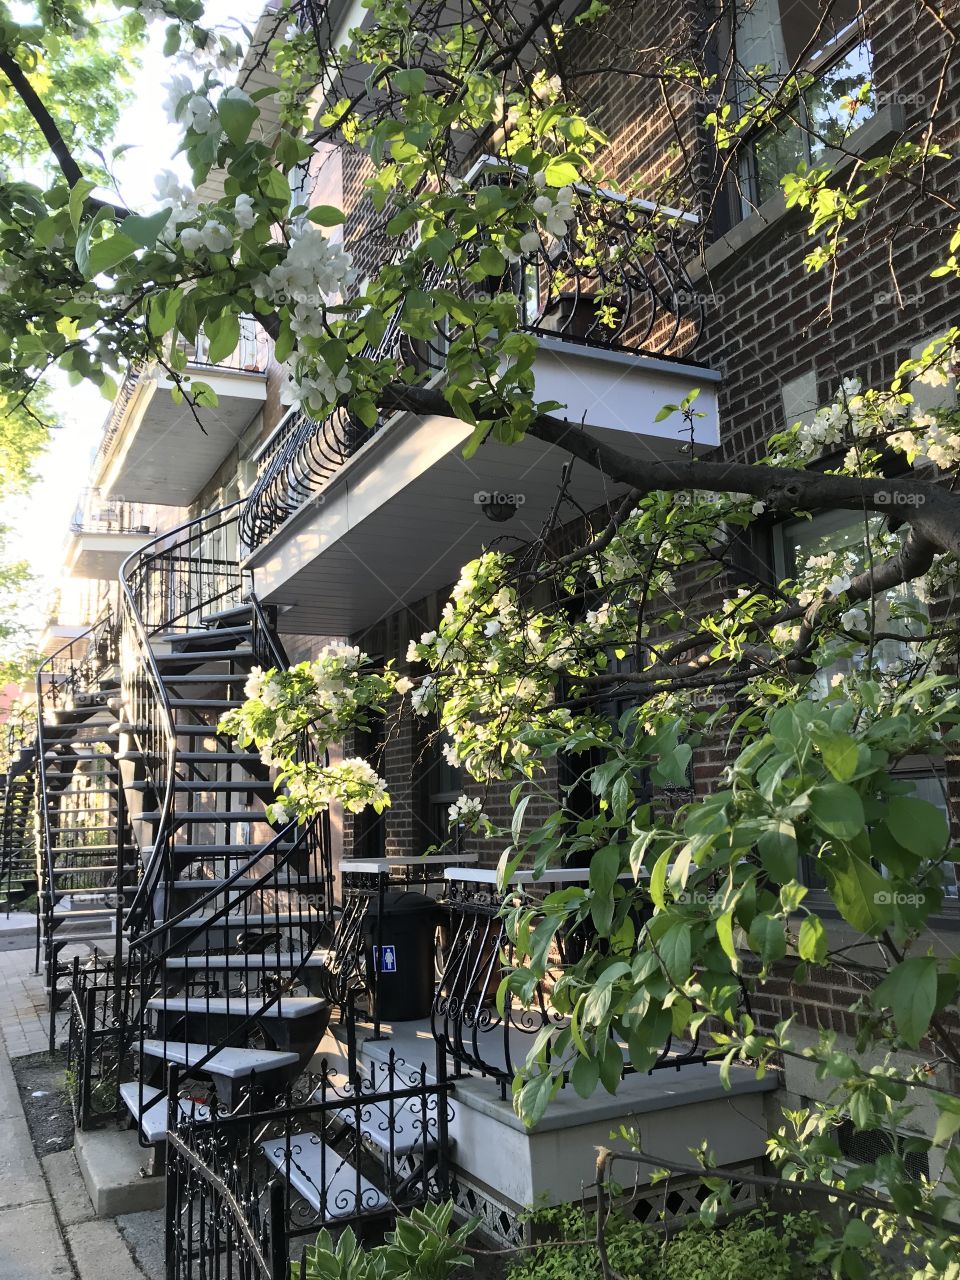 Flowering tree and classic curving stairways in the historic Plateau neighborhood of Montréal